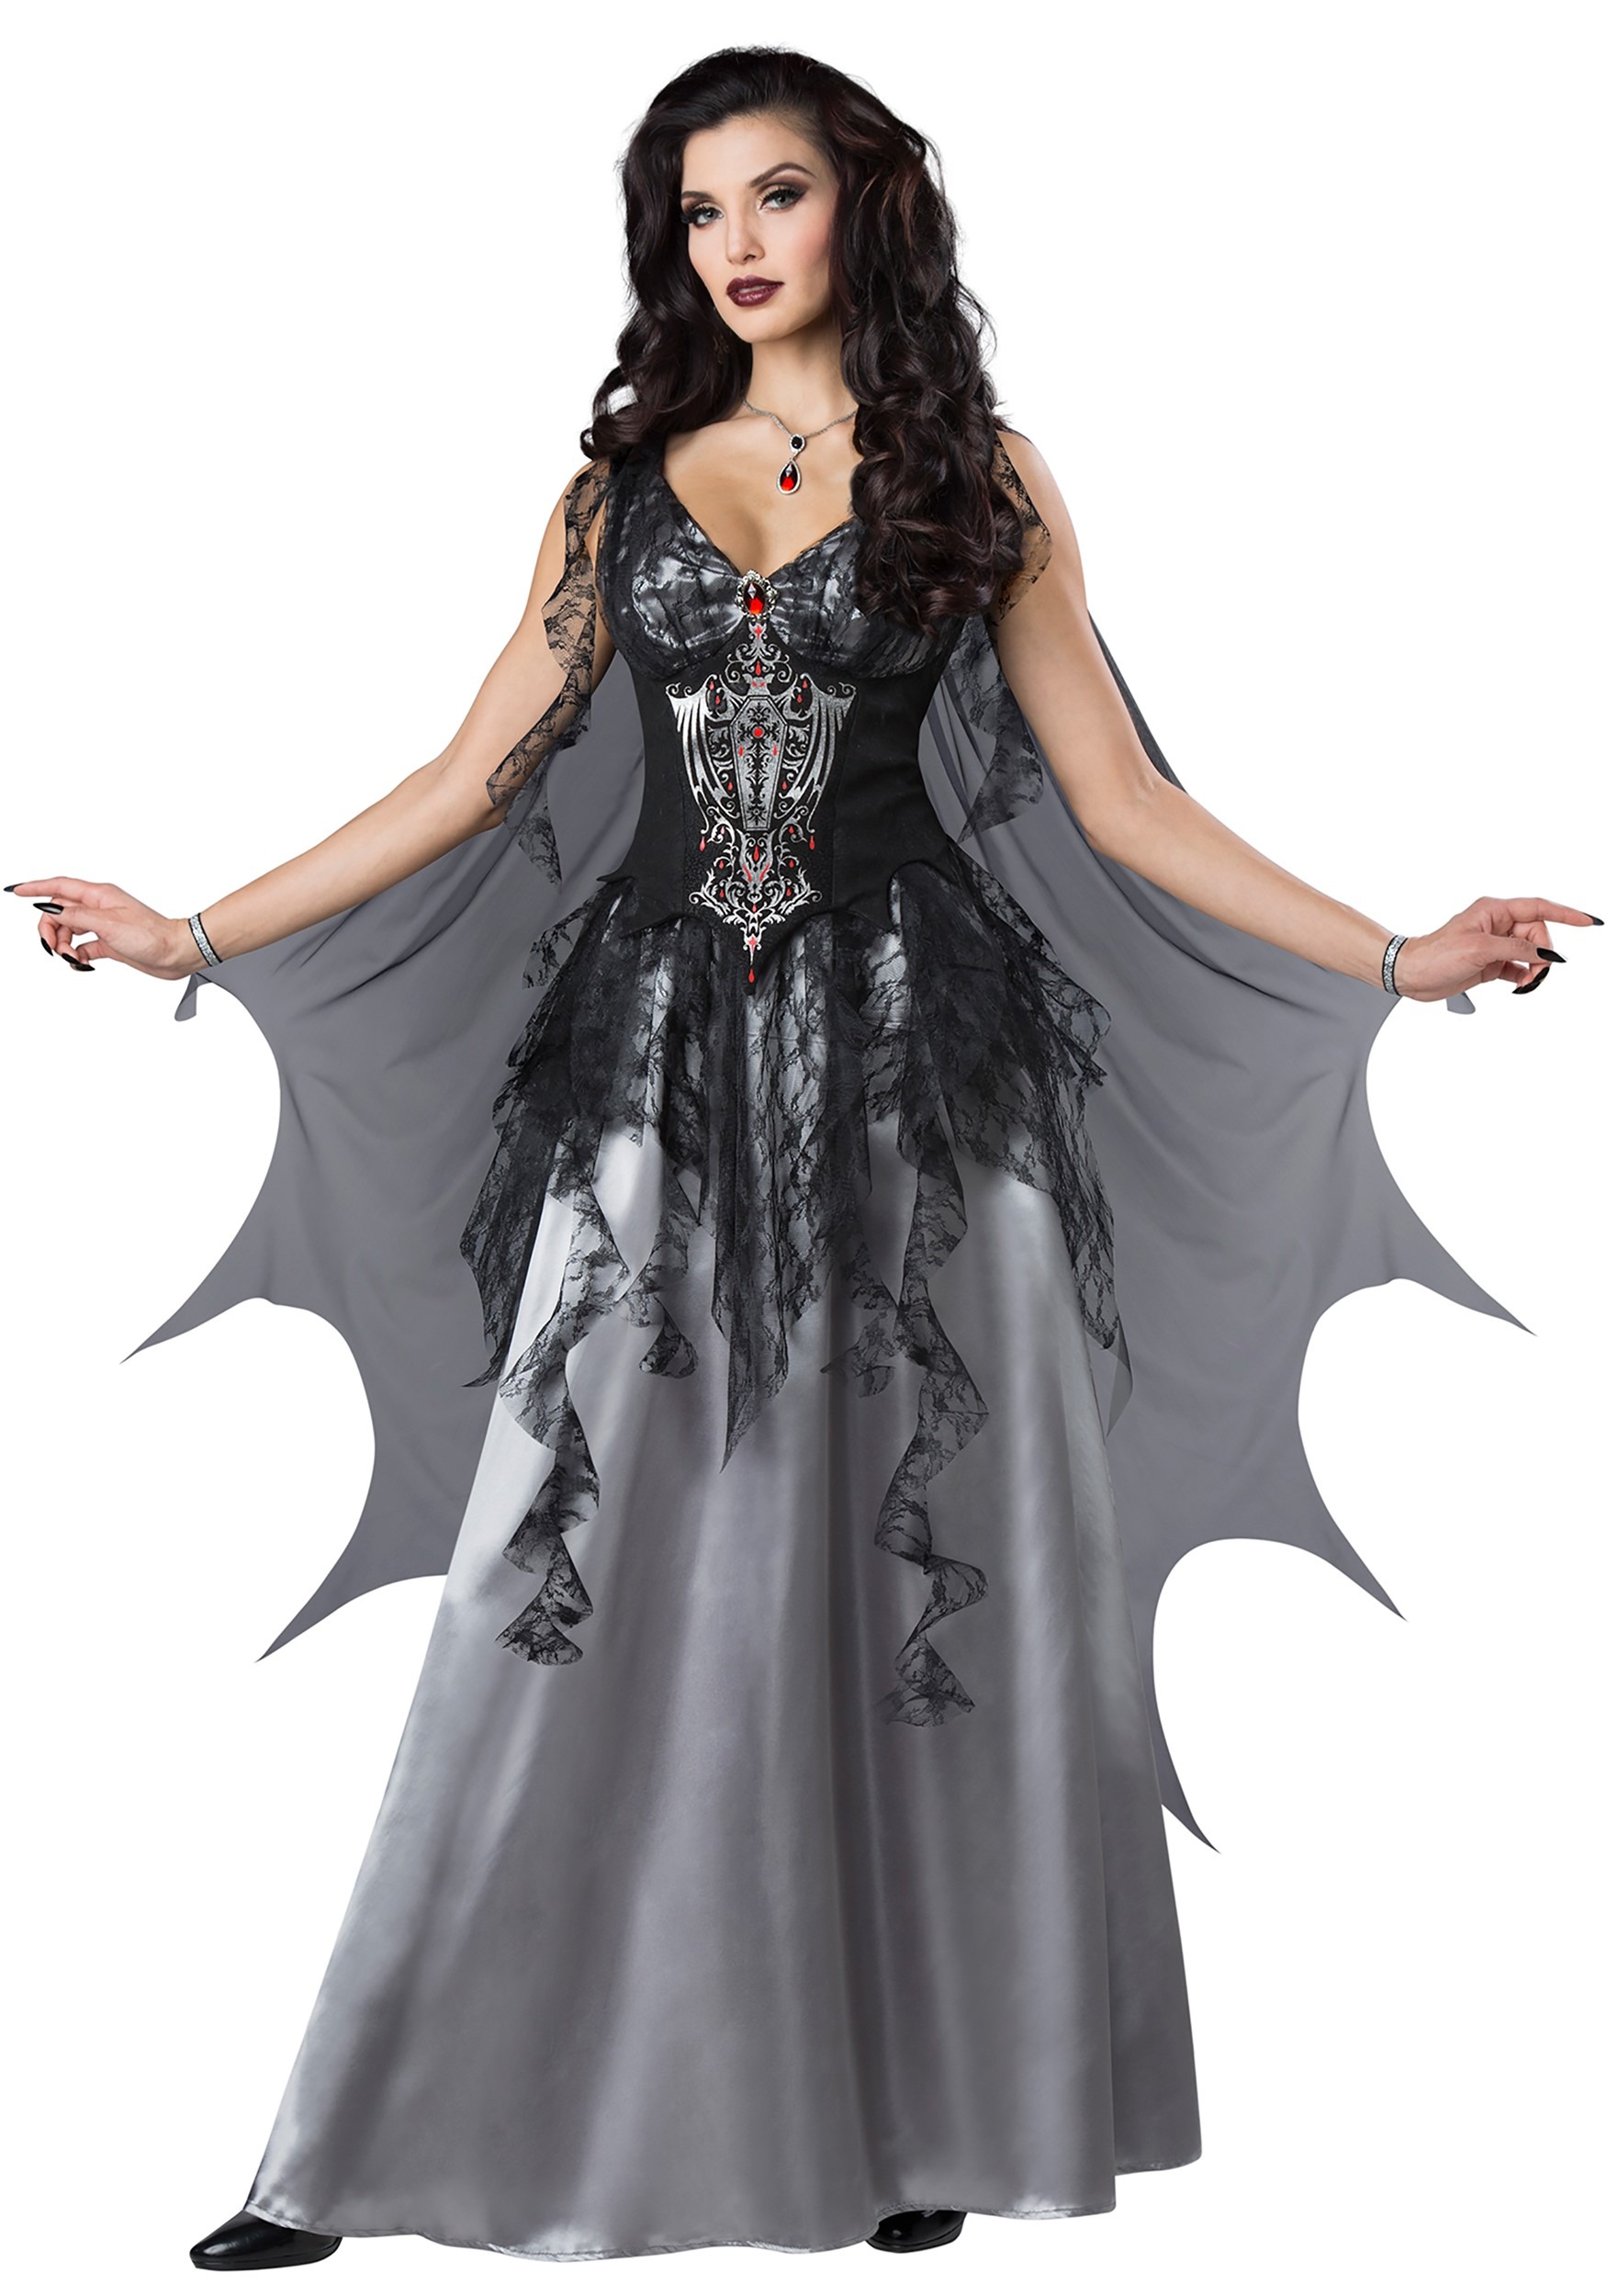 SALE! Plus Size Gothic Witchy / Vampiress / Vampire Bell Sleeve